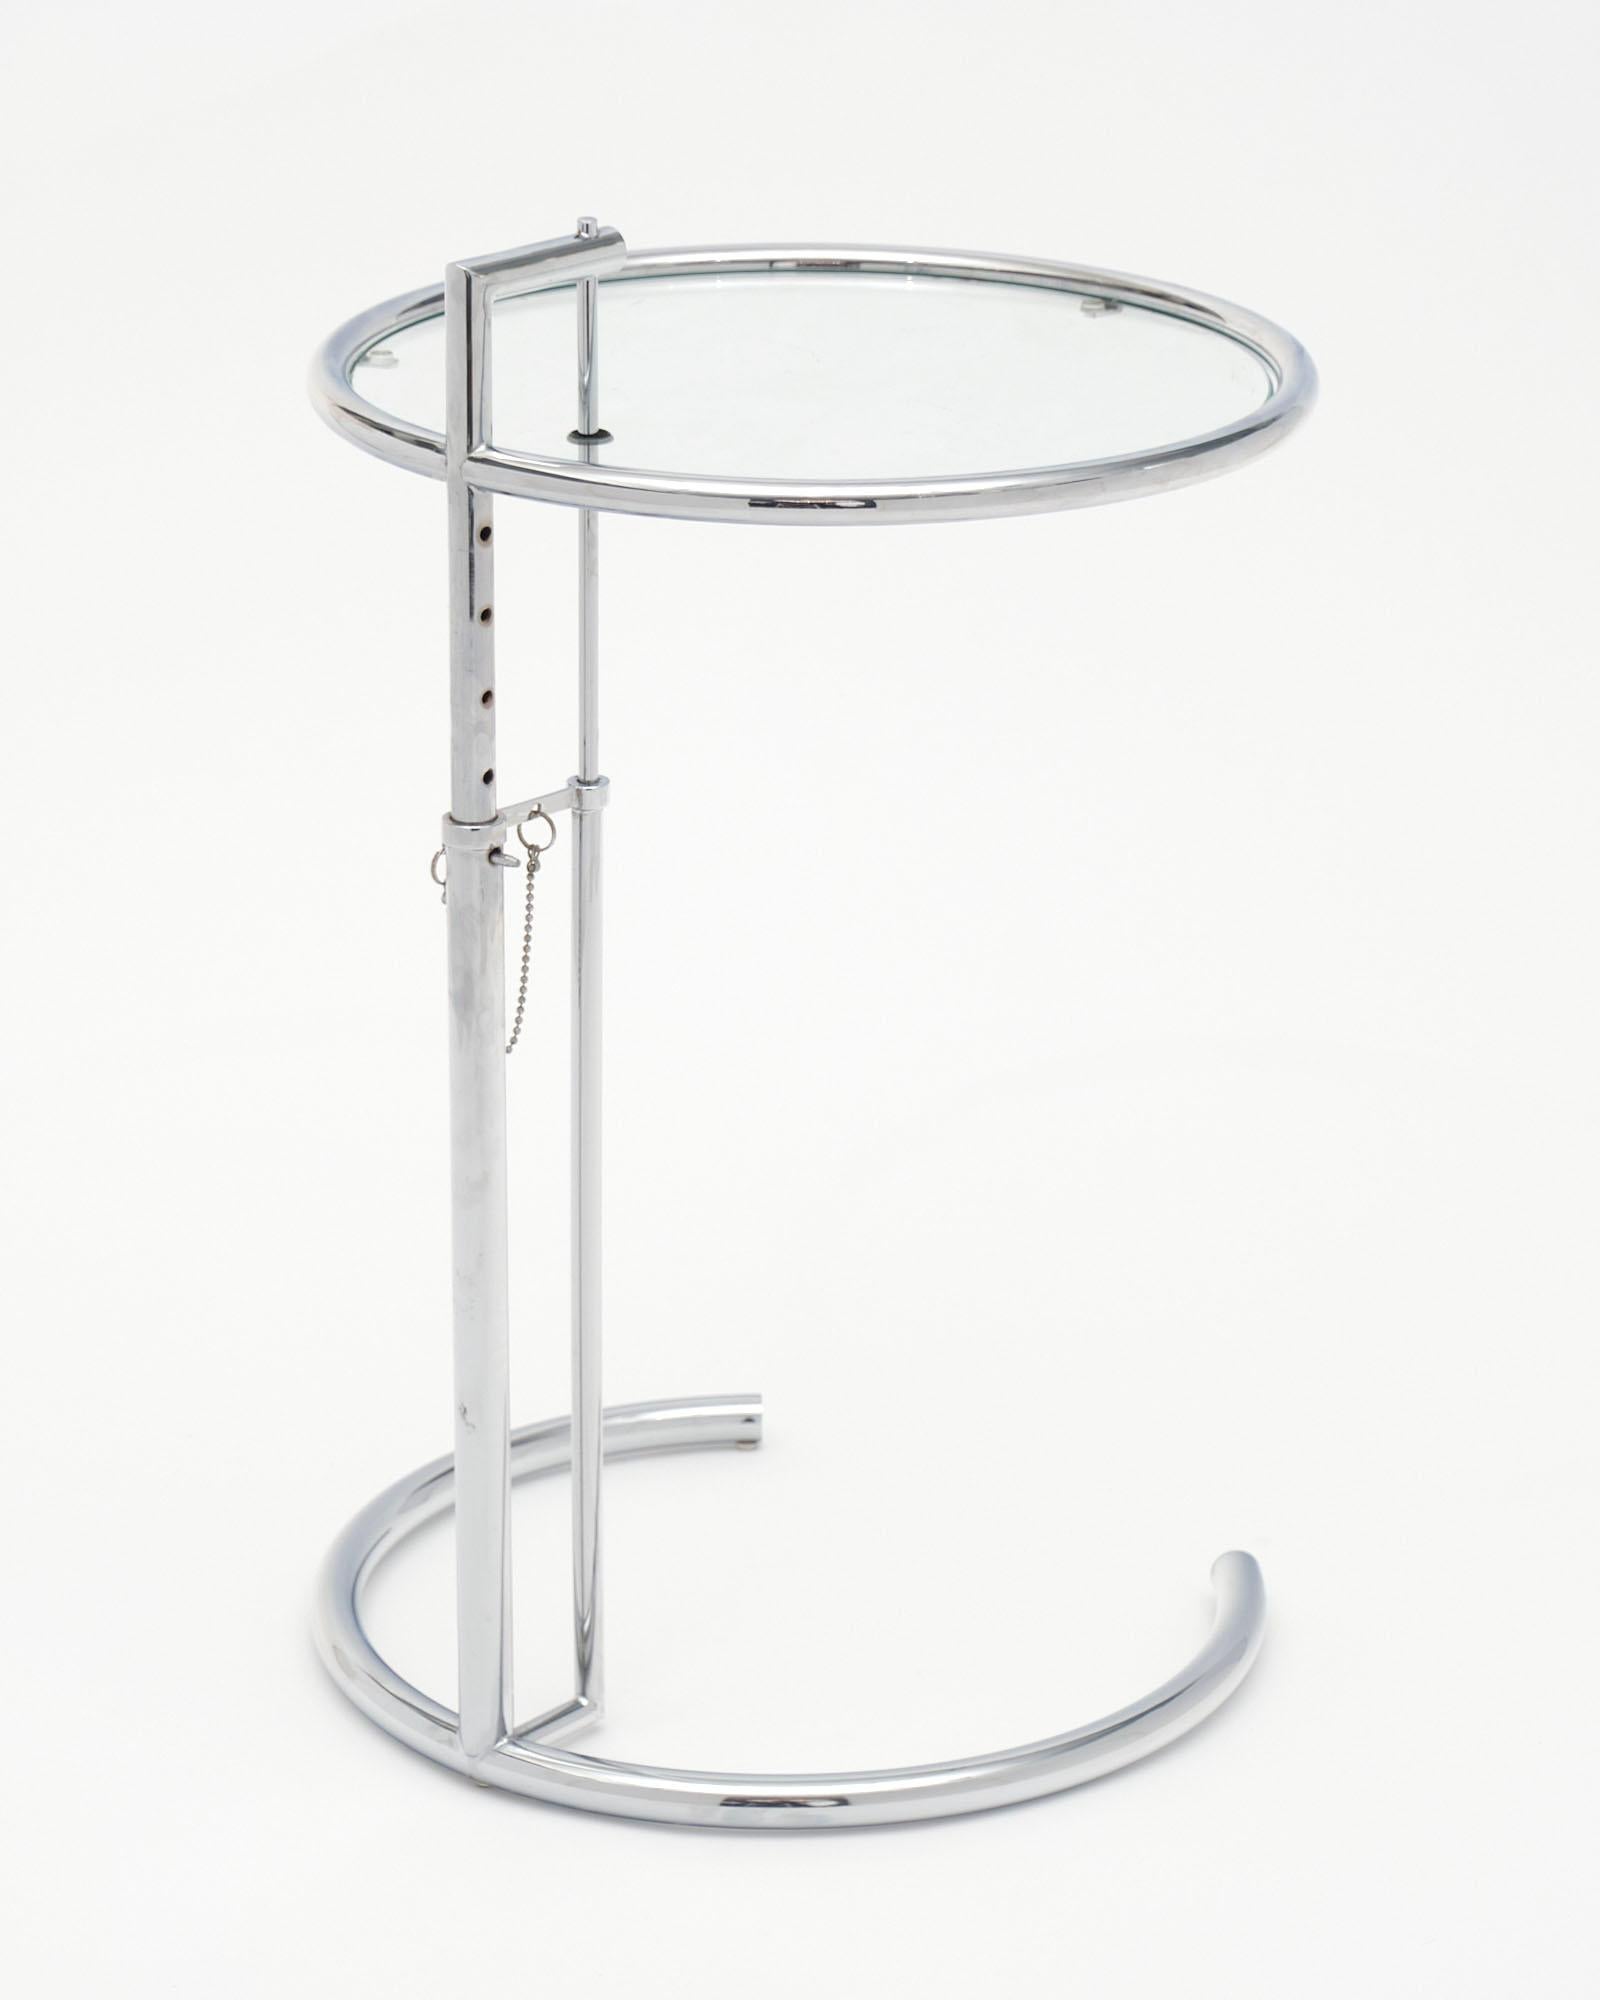 Mid-20th Century E 1027 Adjustable Table Attributed to Eileen Gray For Sale